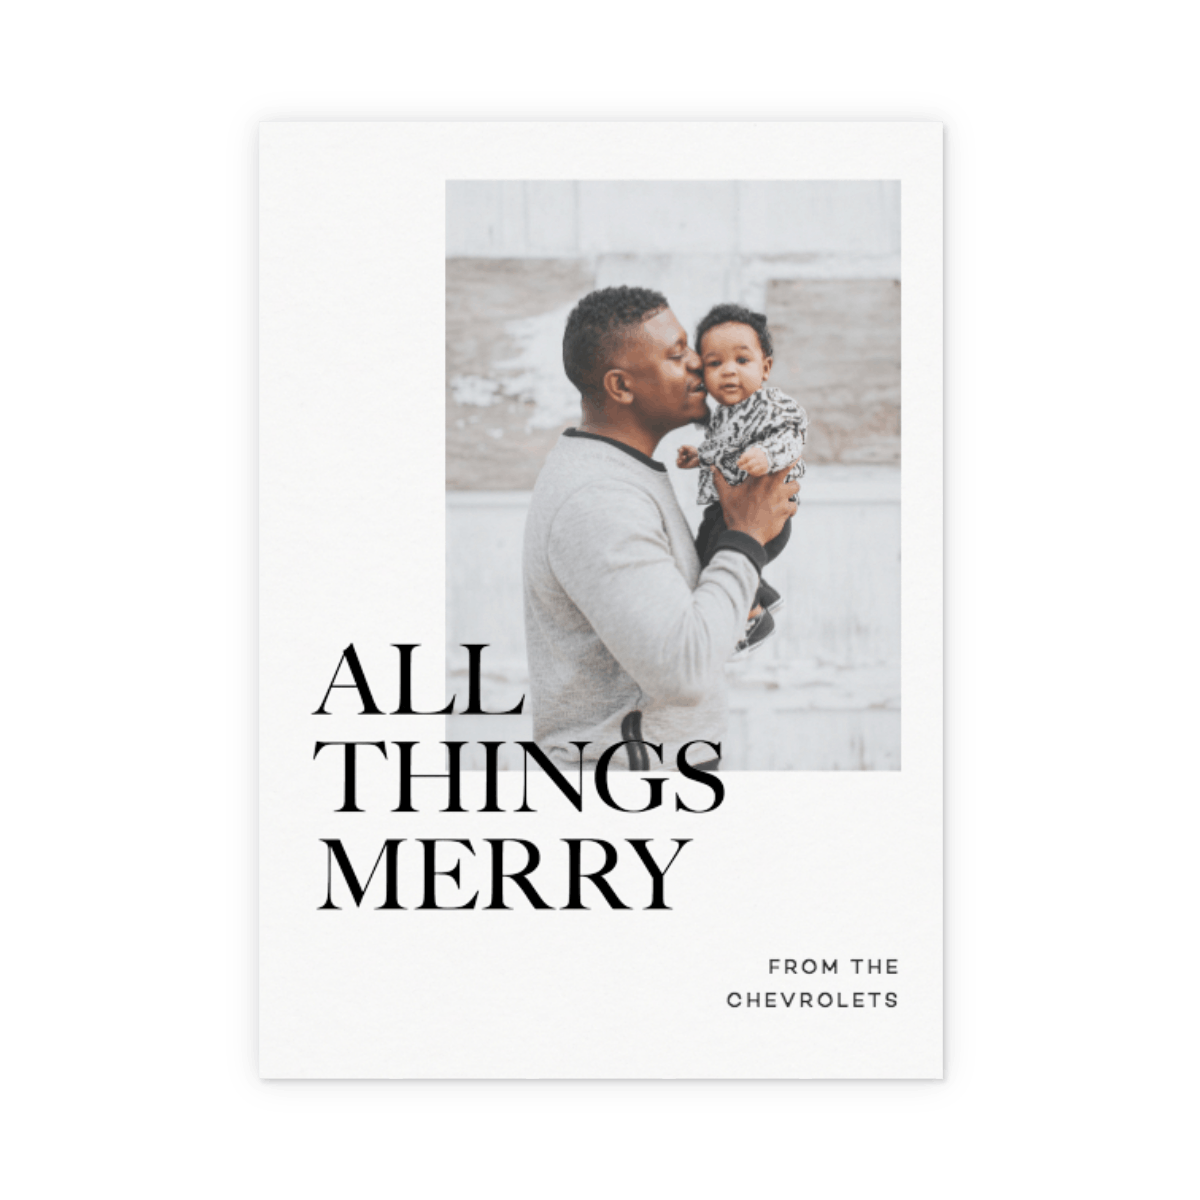 All Things Merry